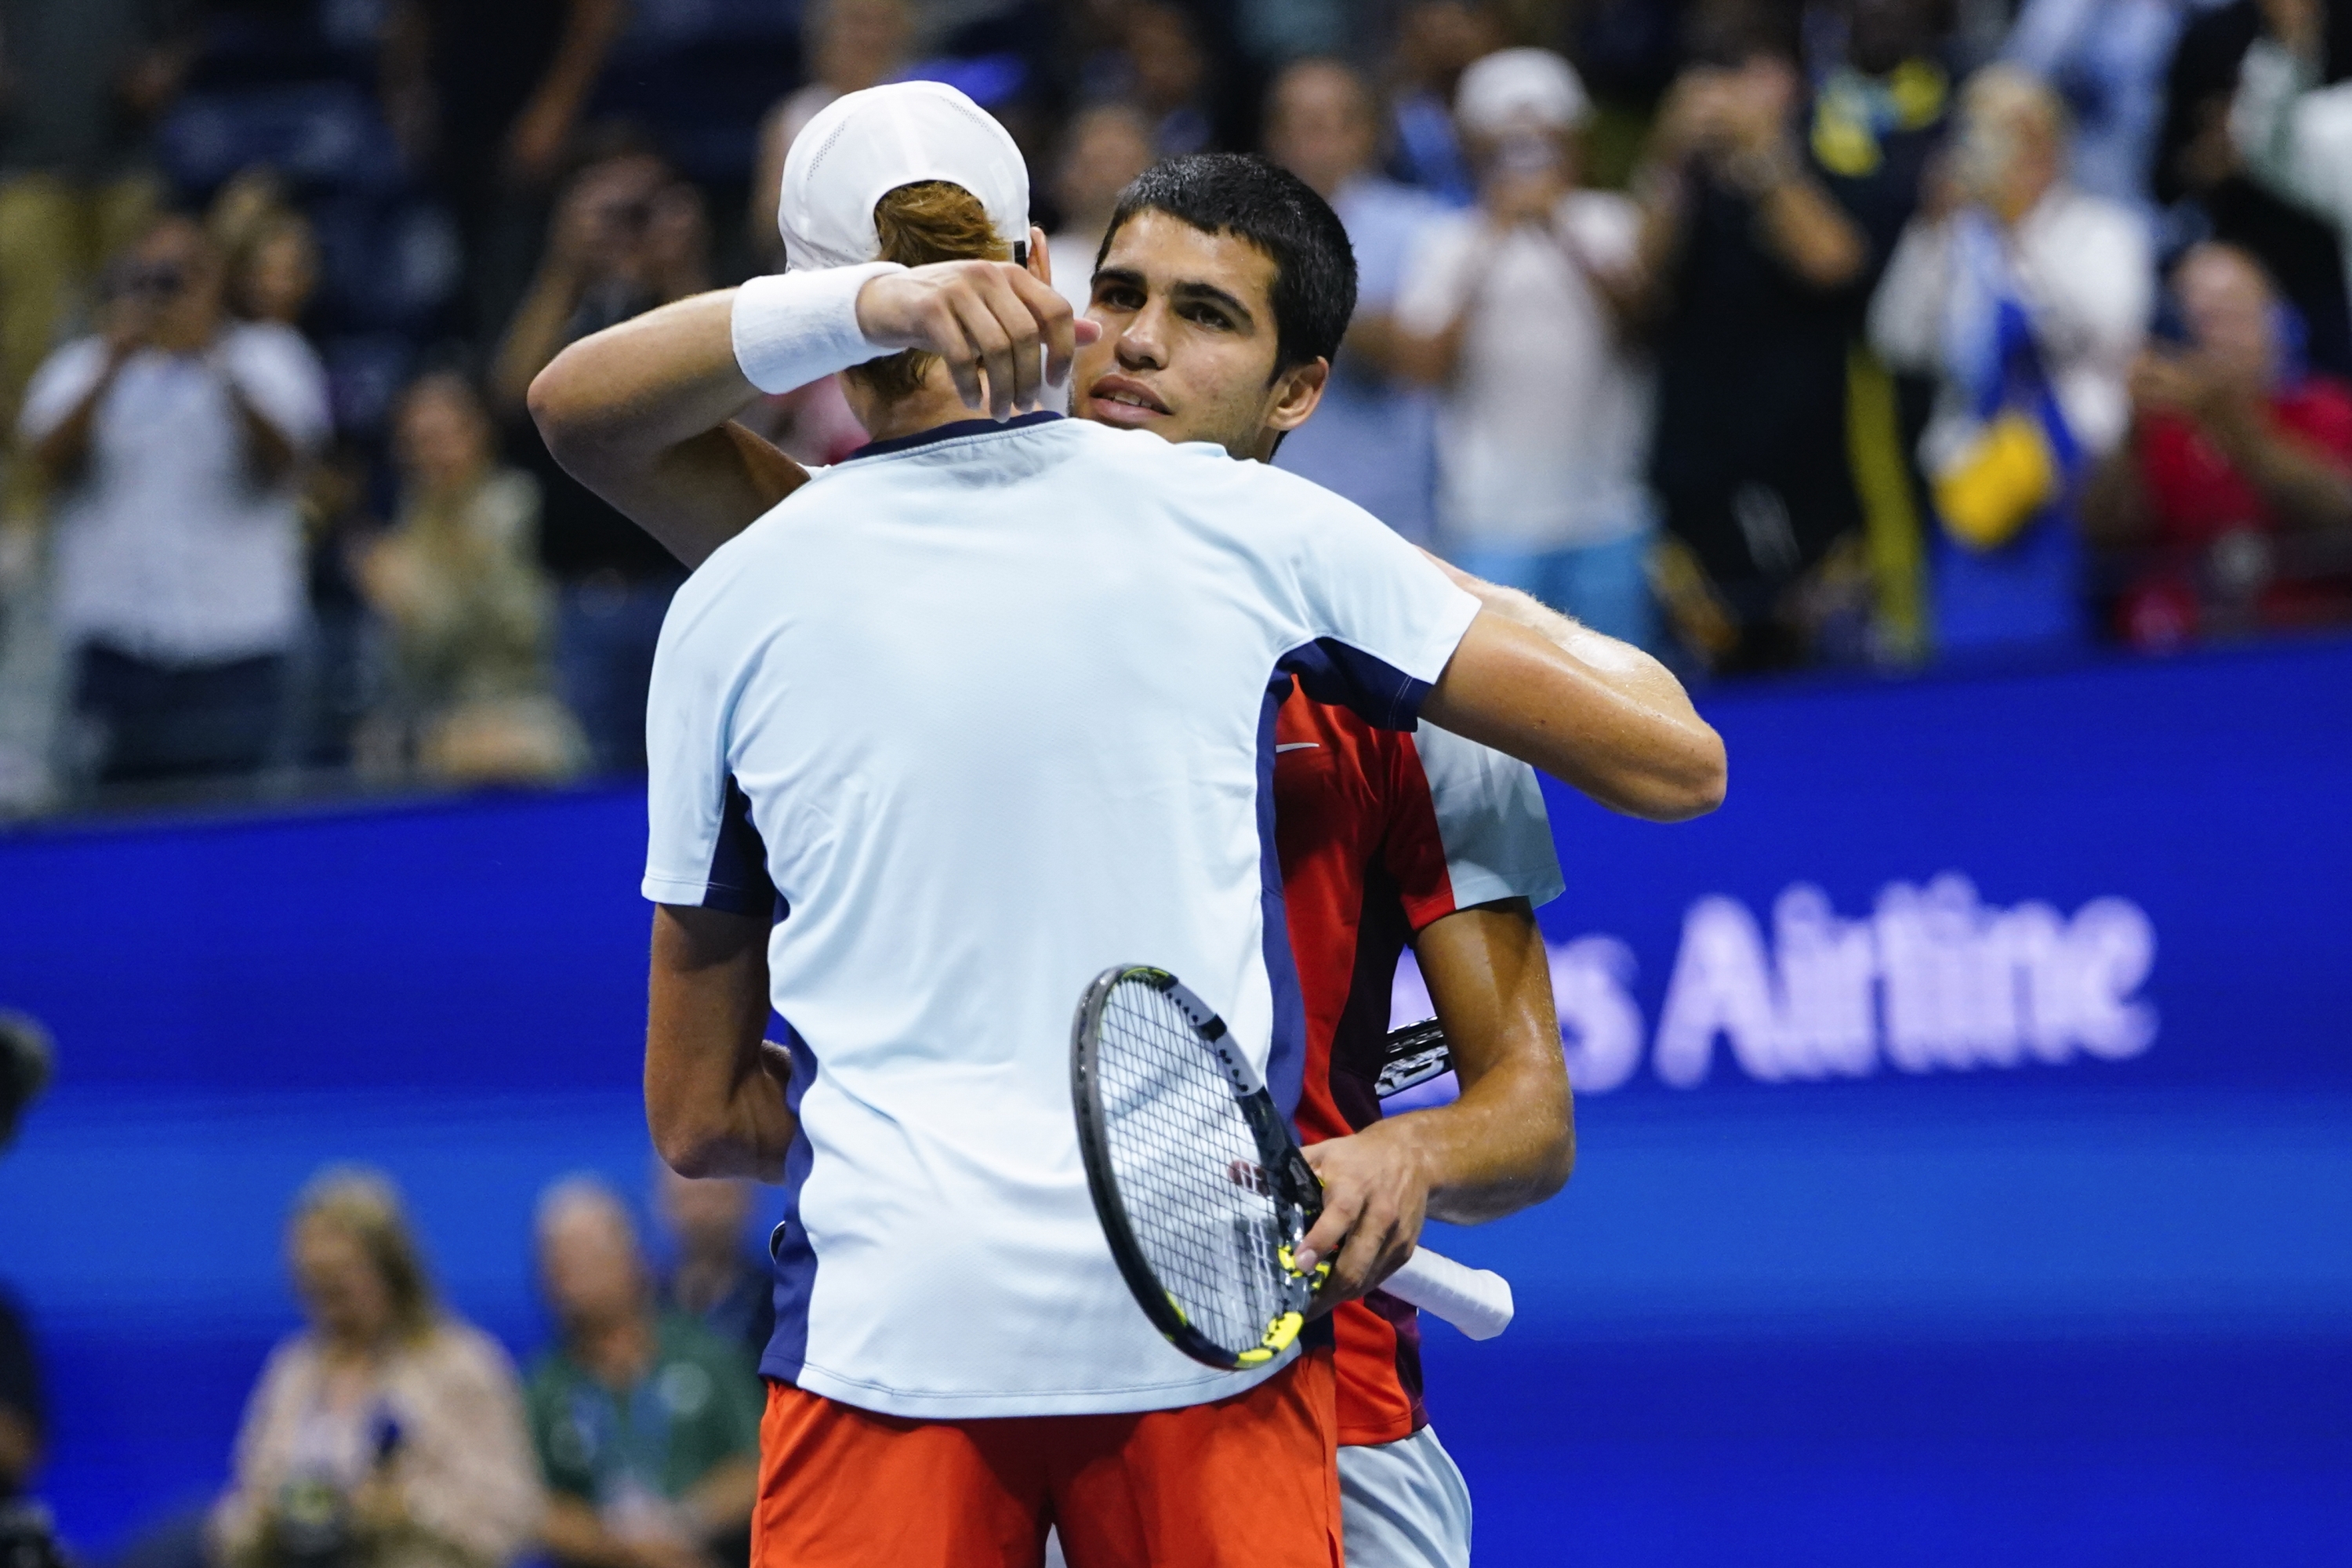 Carlos Alcaraz, of Spain, right, hugs Jannik Sinner, of Italy, after Alcaraz won their match in the quarterfinals of the U.S. Open tennis championships, early Thursday, Sept. 8, 2022, in New York. Alcaraz and Sinner will renew their rivalry on Friday June 7, 2024, in the French Open semifinals. (AP Photo/Frank Franklin II, File)